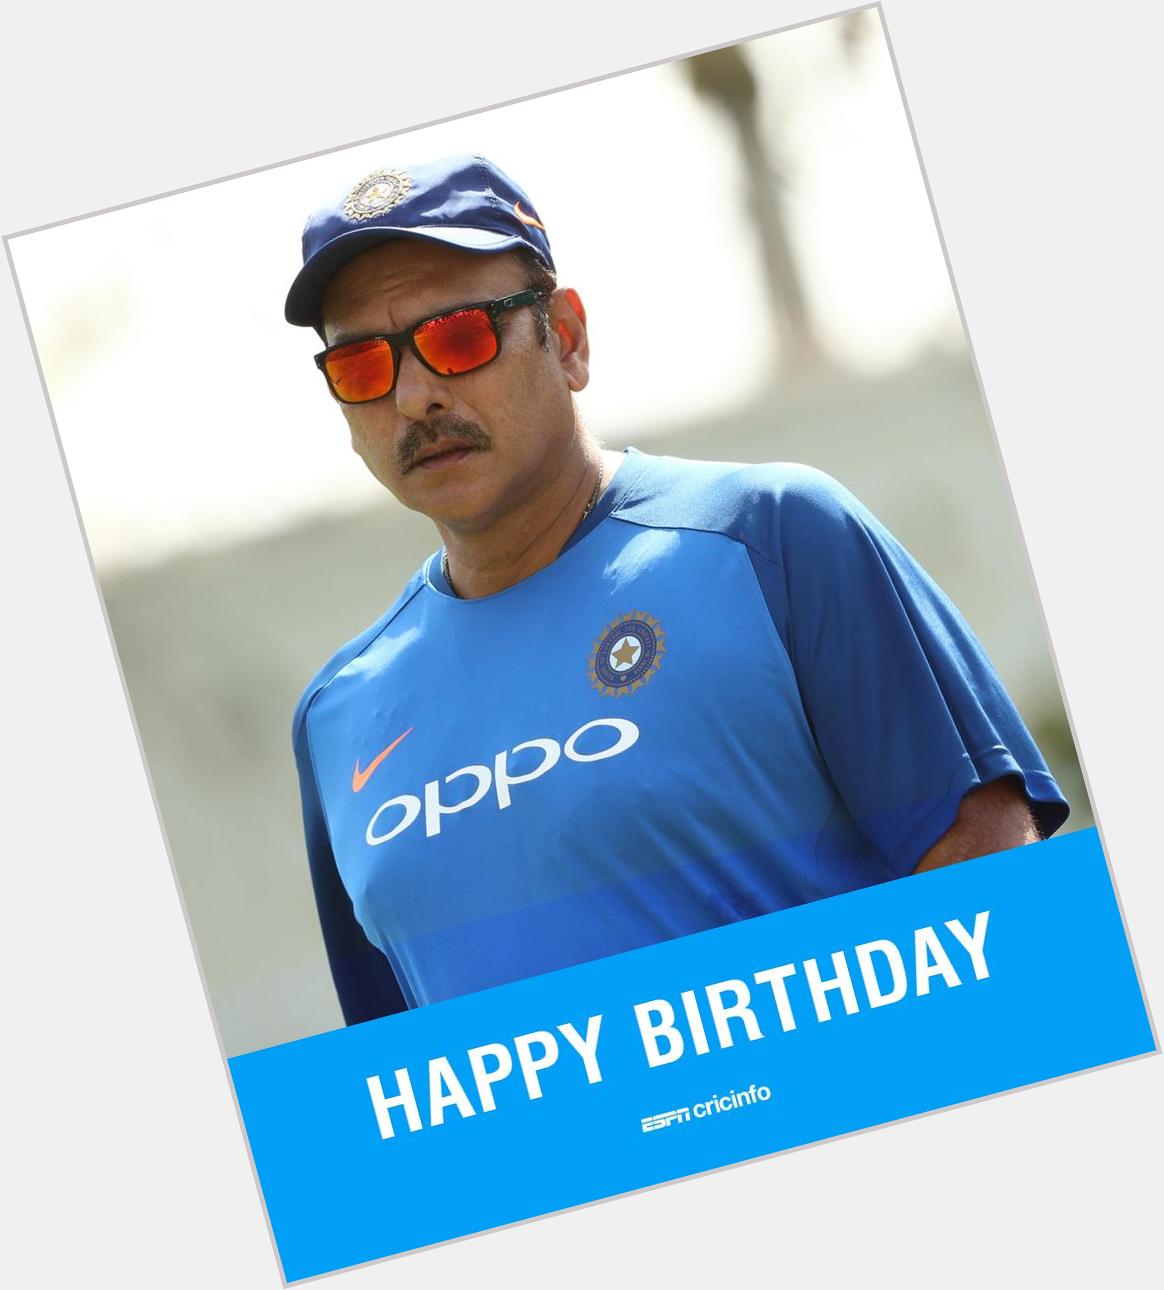  Happy birthday Ravi Shastri!
Can you wish him in typical style?
